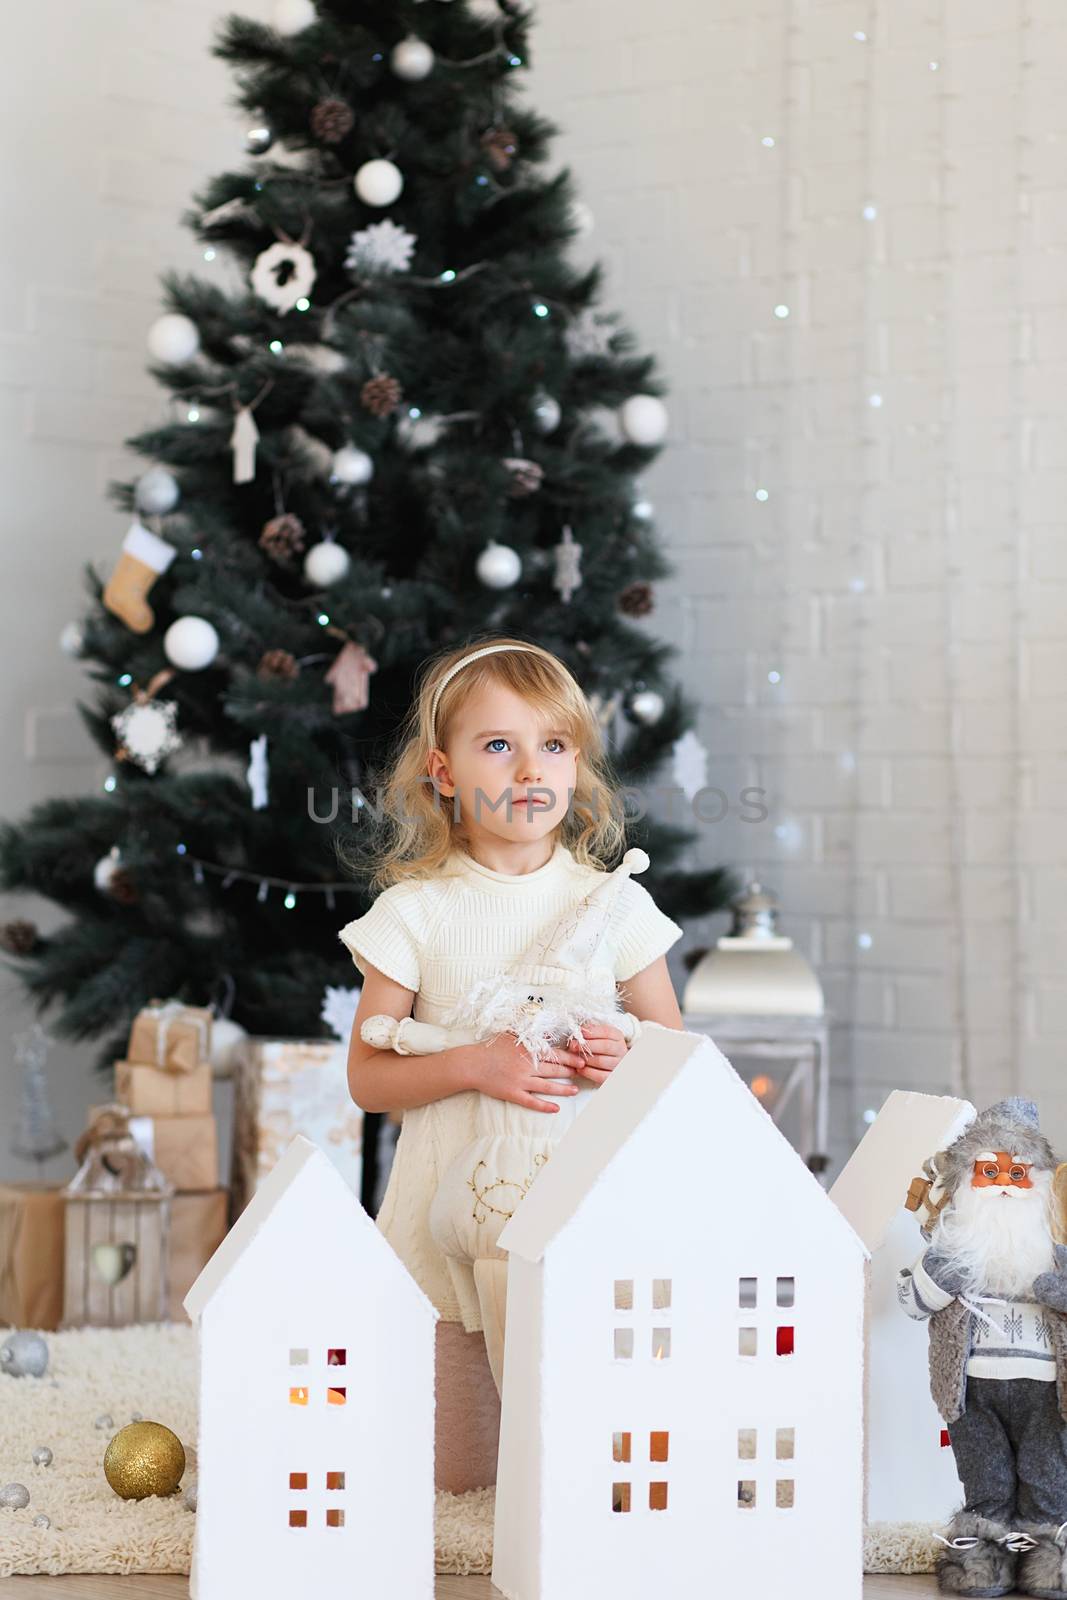 Beautiful Little girl waiting for a miracle in Christmas decorations